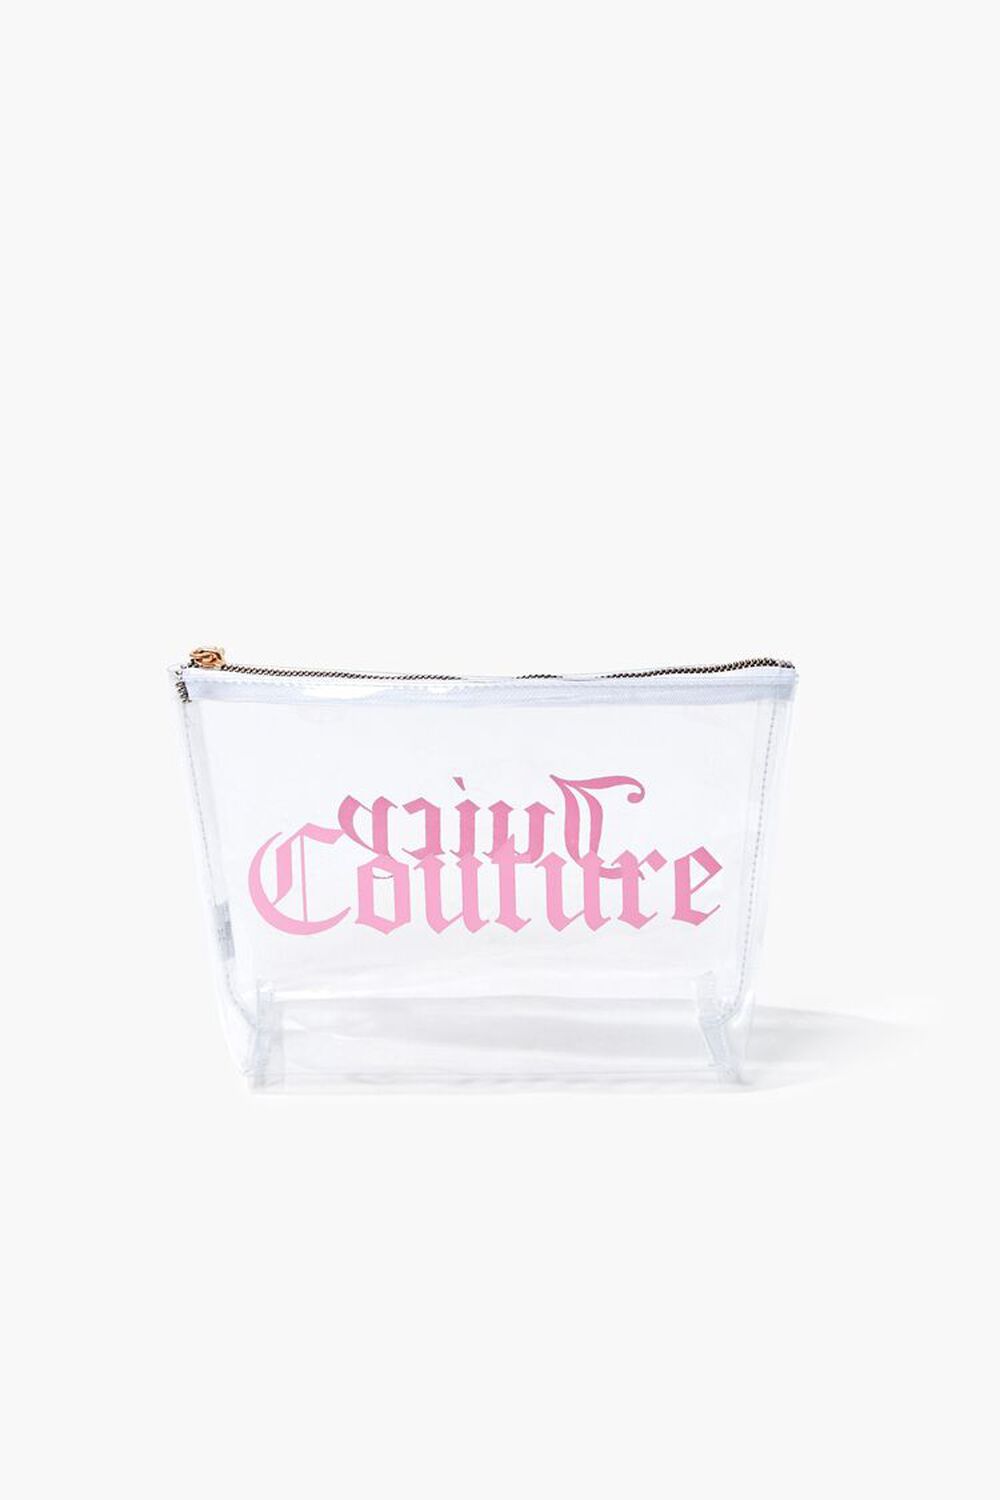 Juicy Couture Forever 21 Bag pink purse NEW ✨